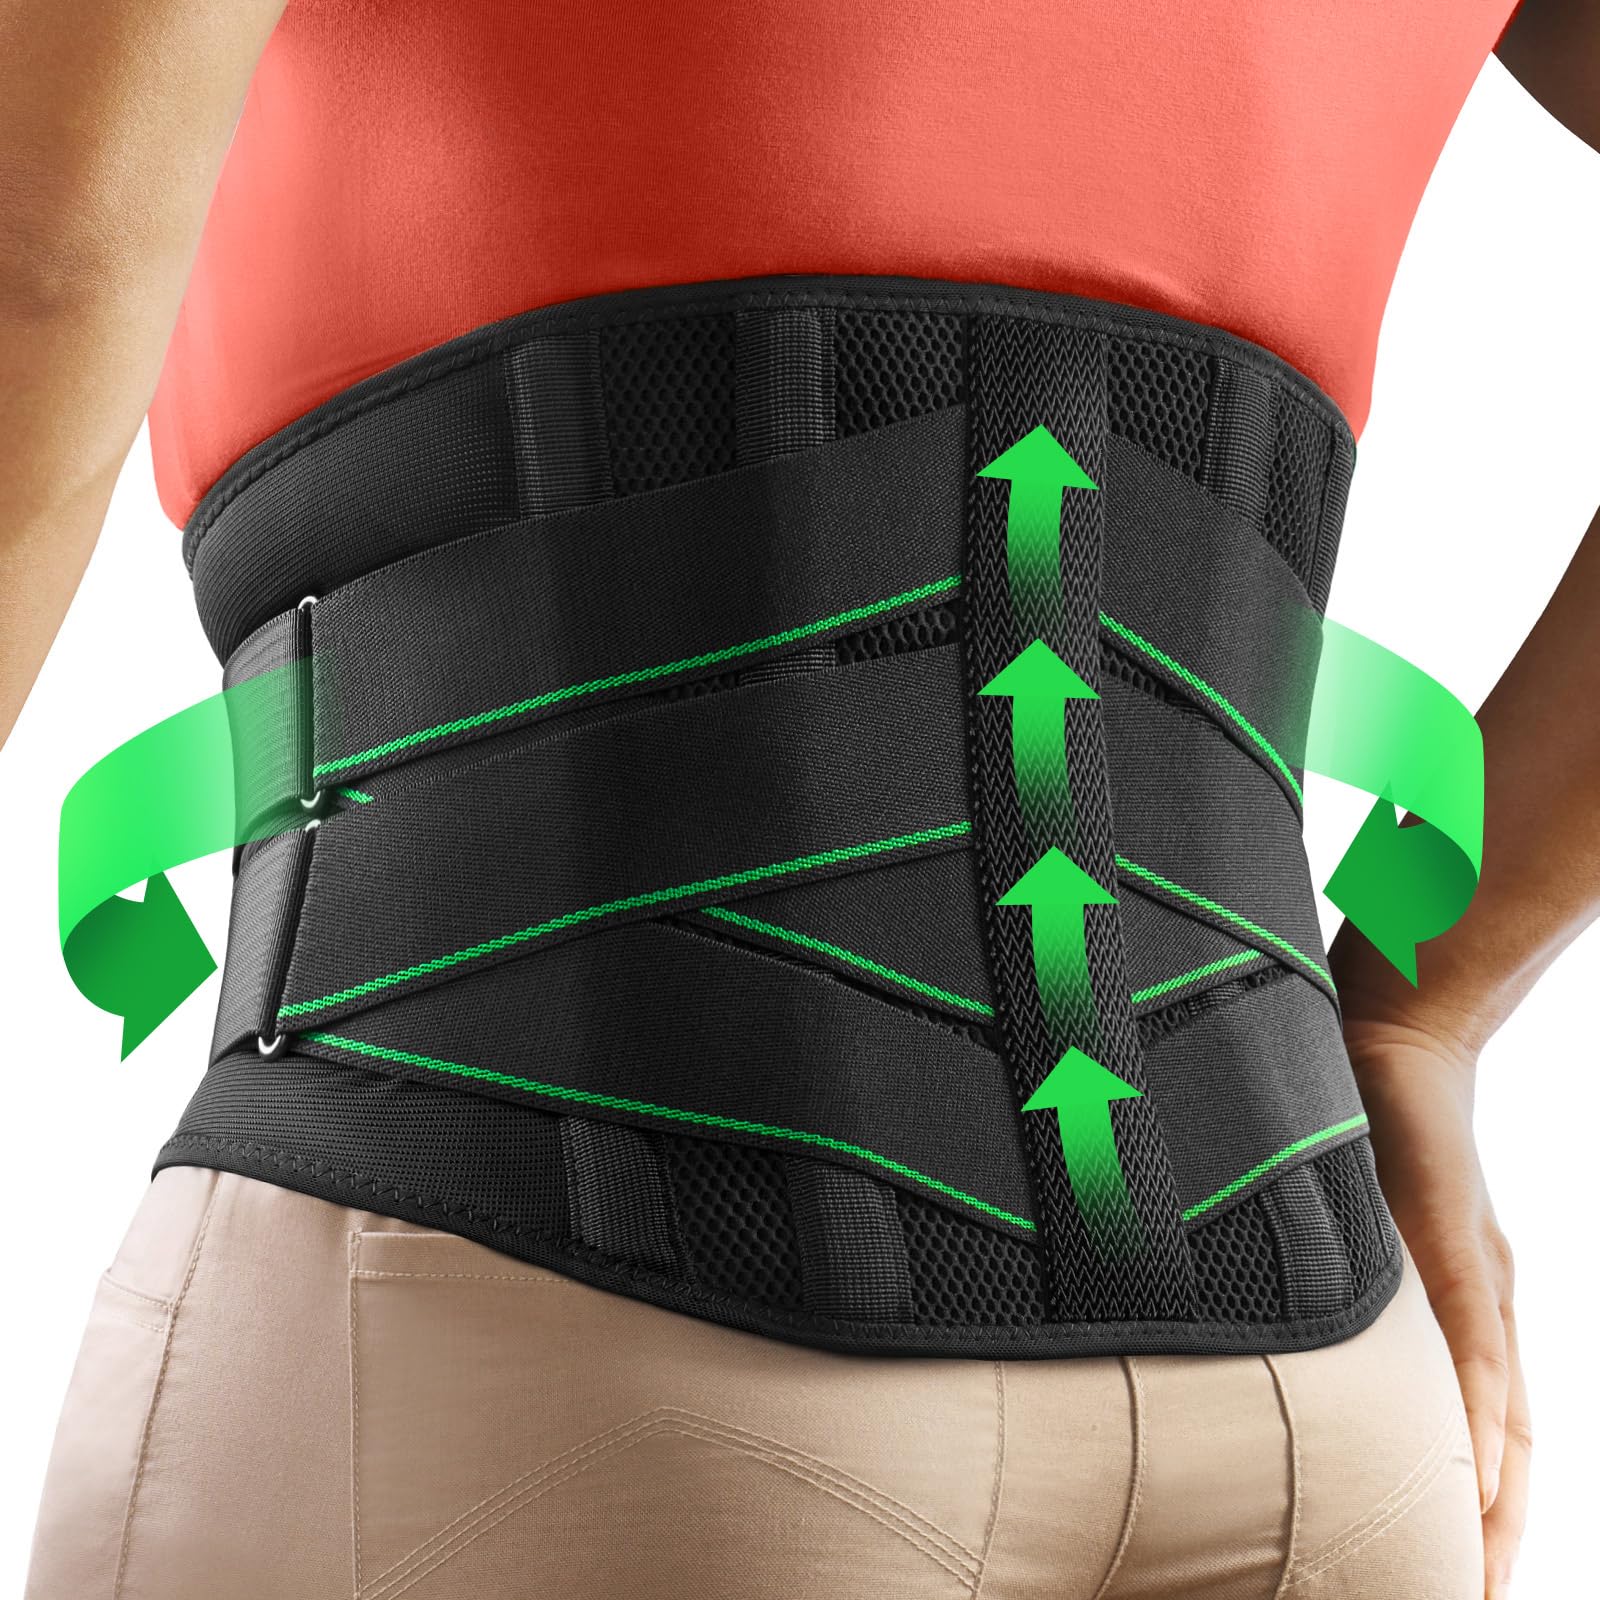 Back Brace for Lower Back Pain Relief Women and Men, Adjustable Lumbar  Support with 4 Metal Stays and Lumbar Pad, Relieves Back Pain from  Sciatica